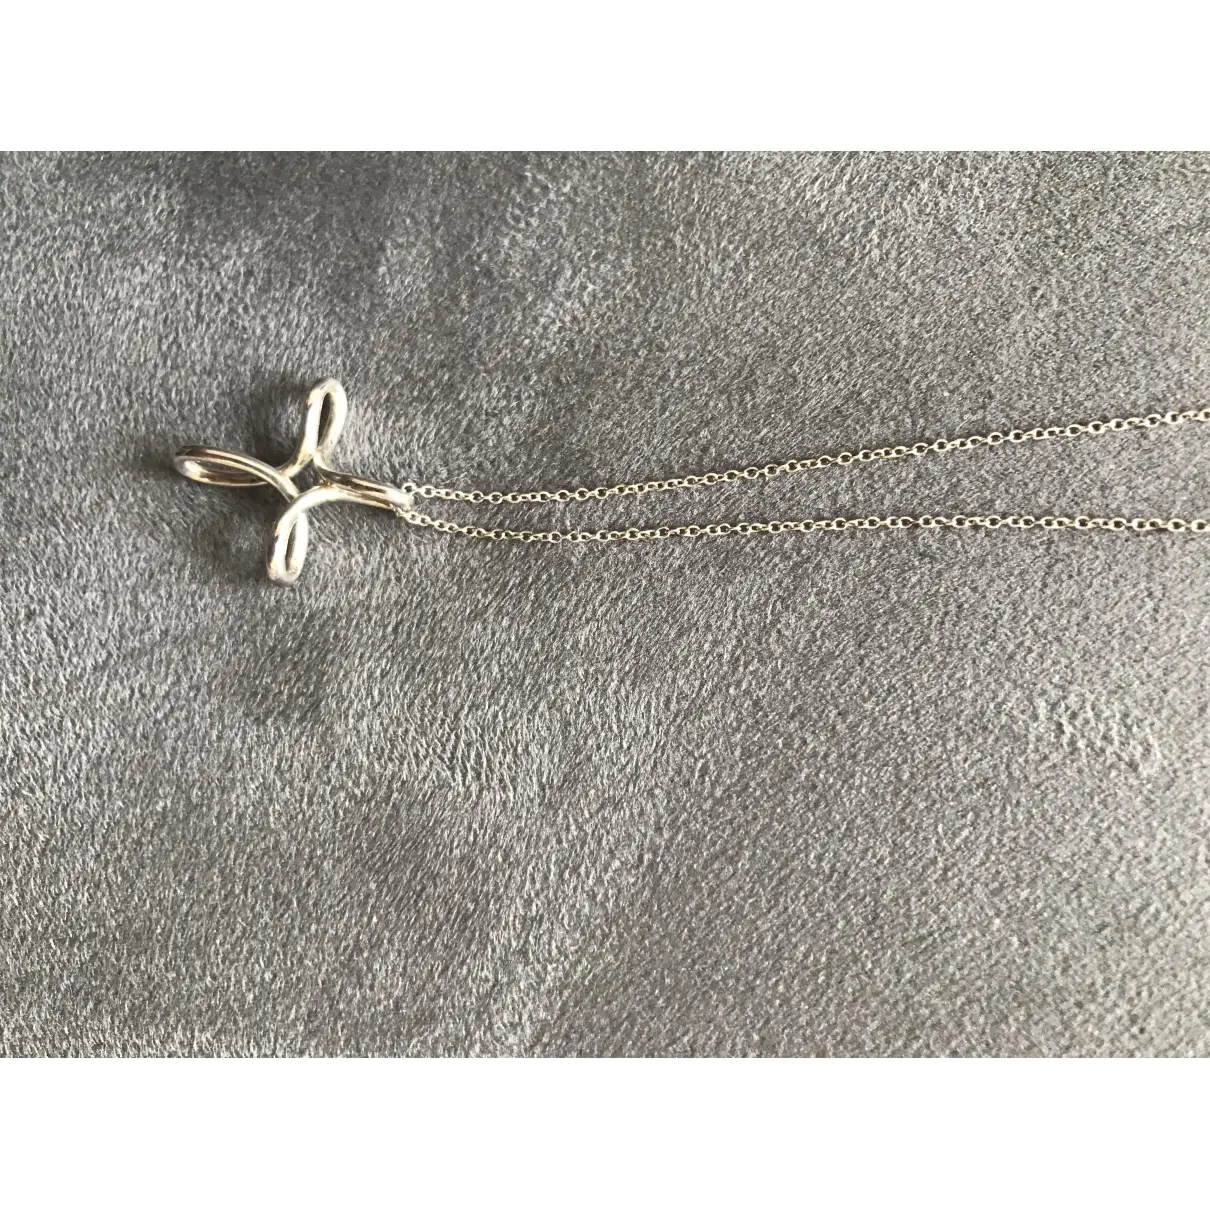 Buy Tiffany & Co Silver necklace online